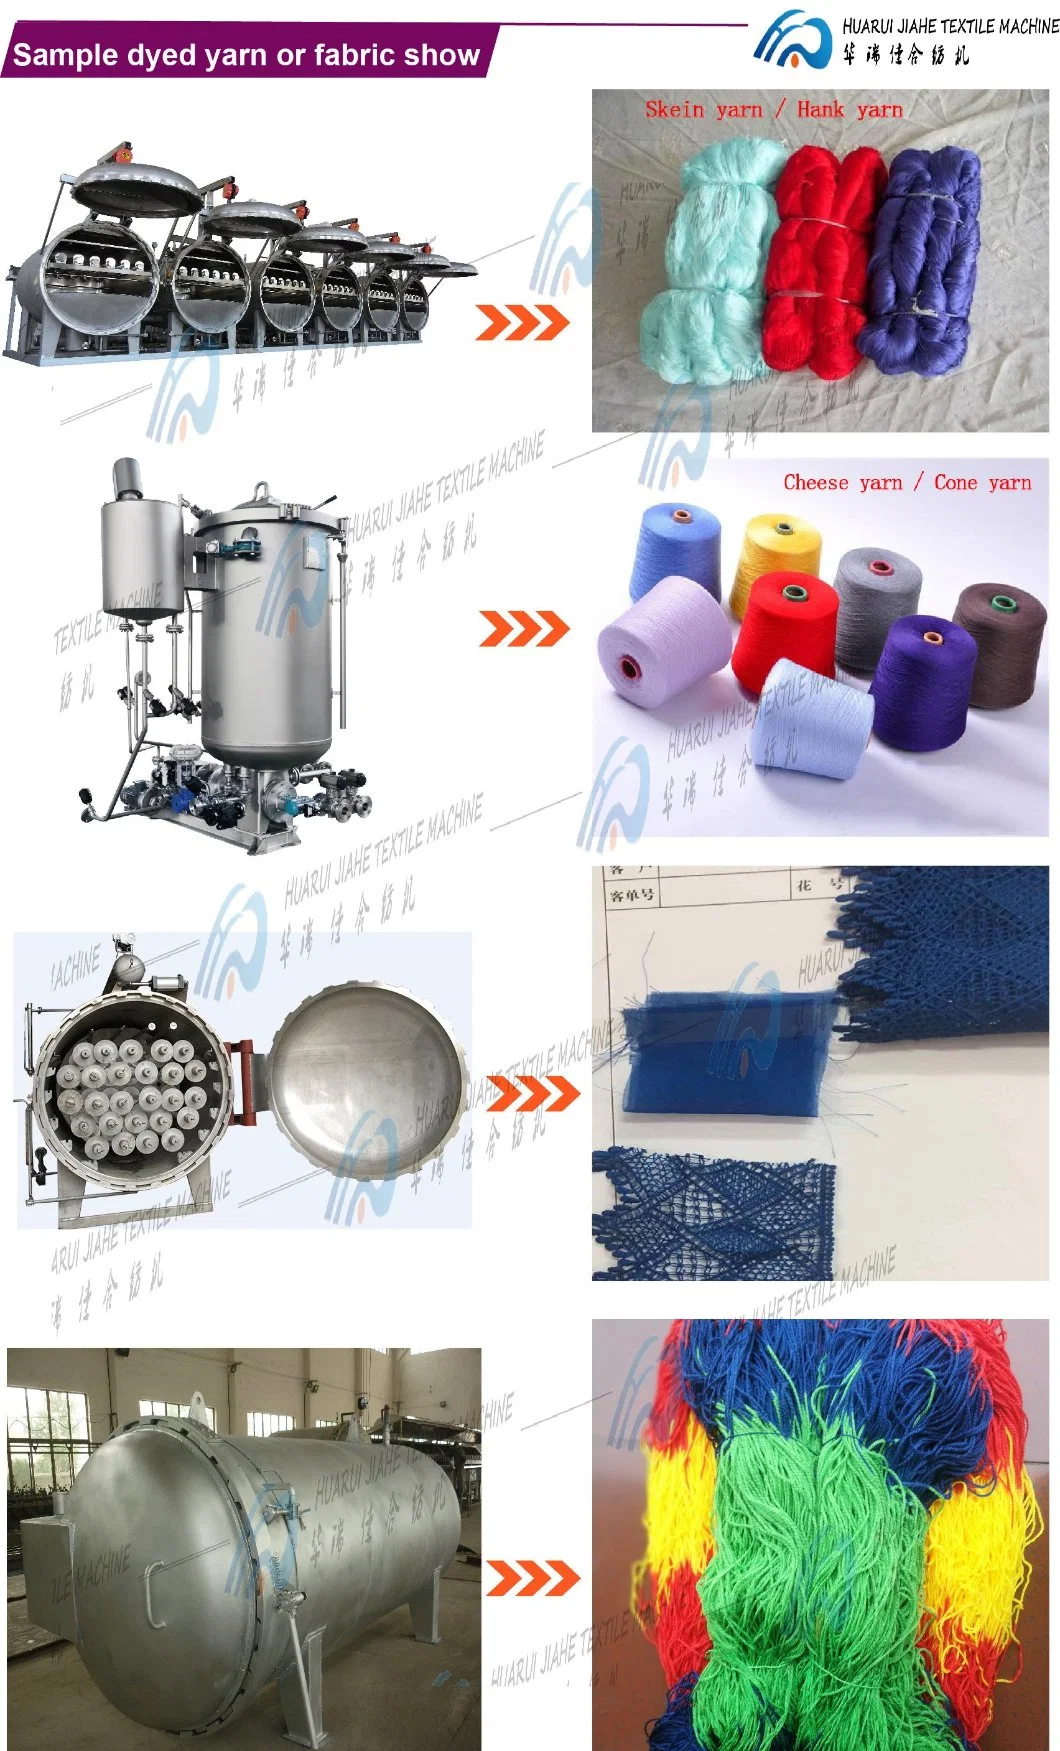 New Brand 2020 Steaming Dyeing Machine Manufacturer with Cheapest Price to Elimiate Electrostaics, Yarn Preshrinks, Make Fabric Size Is Atable